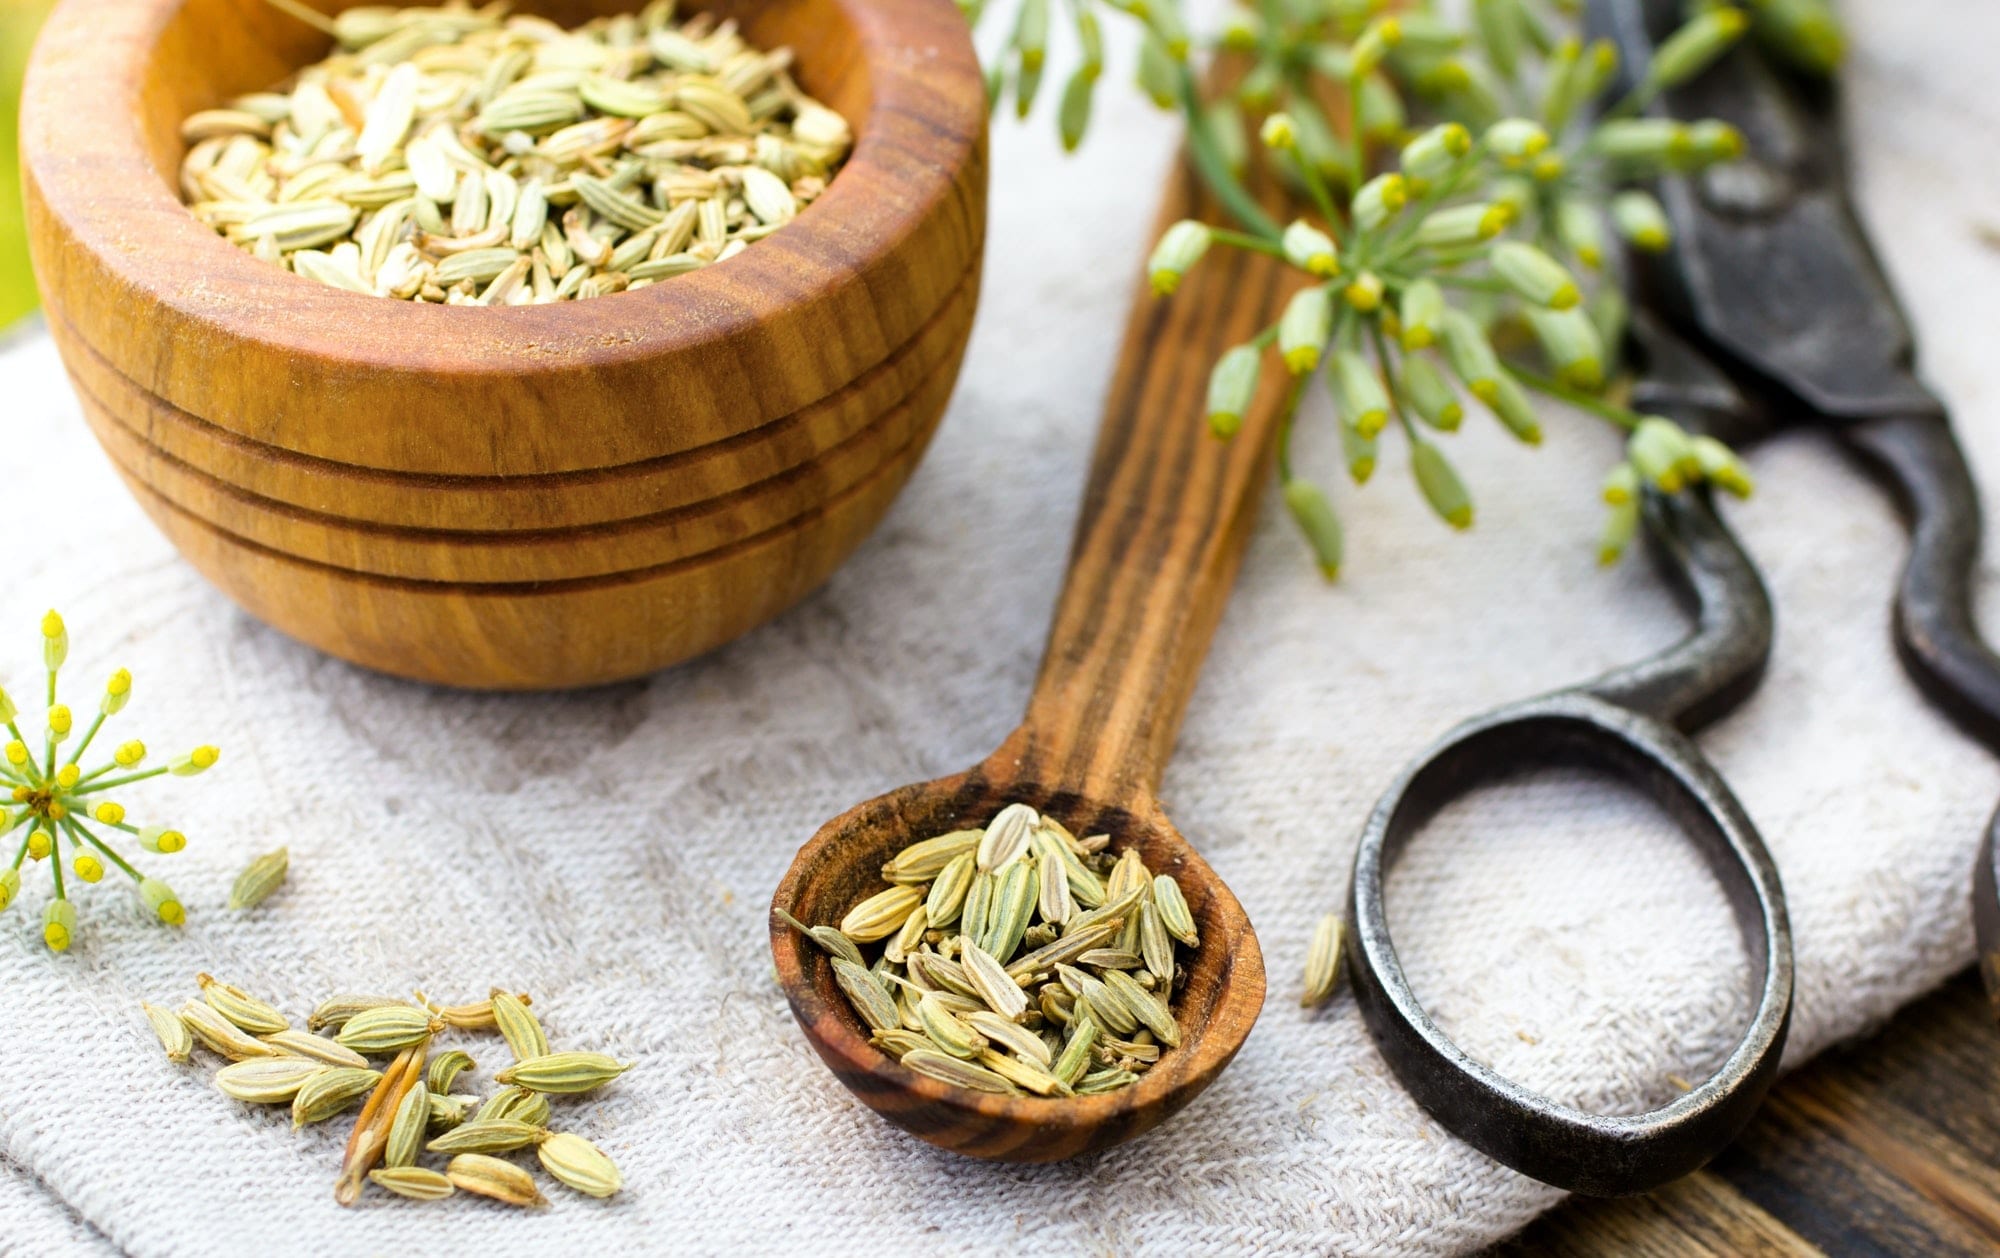 What Do You Use Fennel Seed For